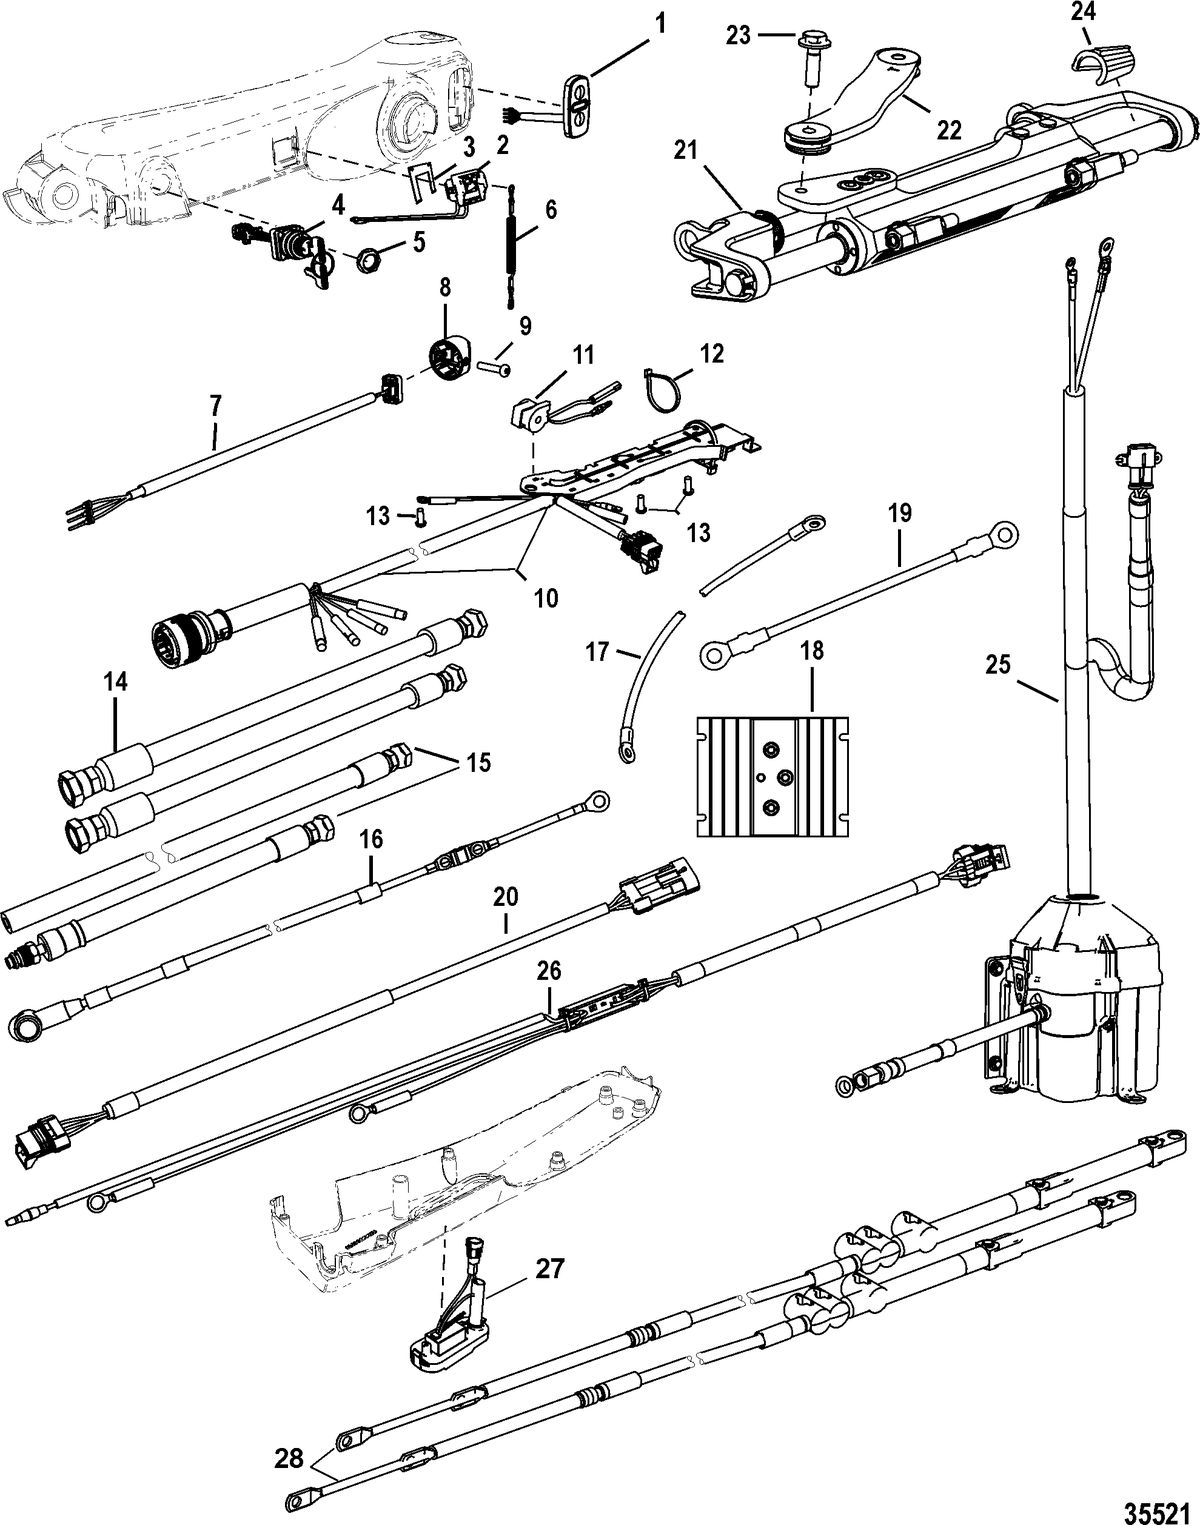 ACCESSORIES STEERING SYSTEMS AND COMPONENTS Tiller Handle Kit Components(Big Tiller-Power Steer,Mech.)